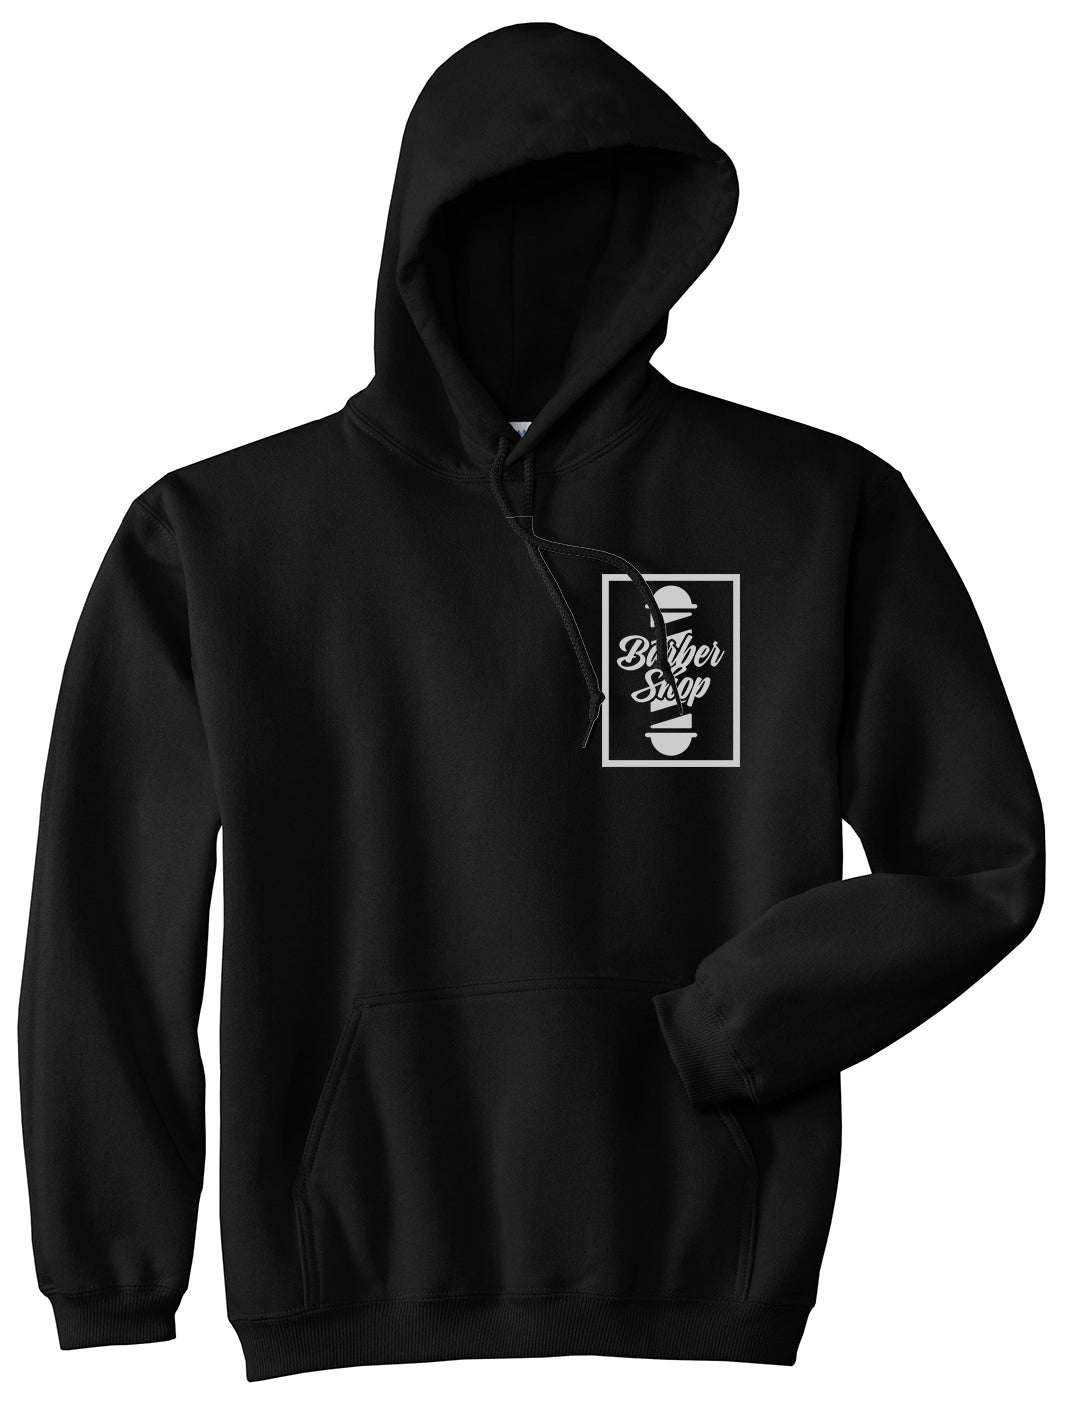 Barbershop Pole Chest Black Pullover Hoodie by Kings Of NY